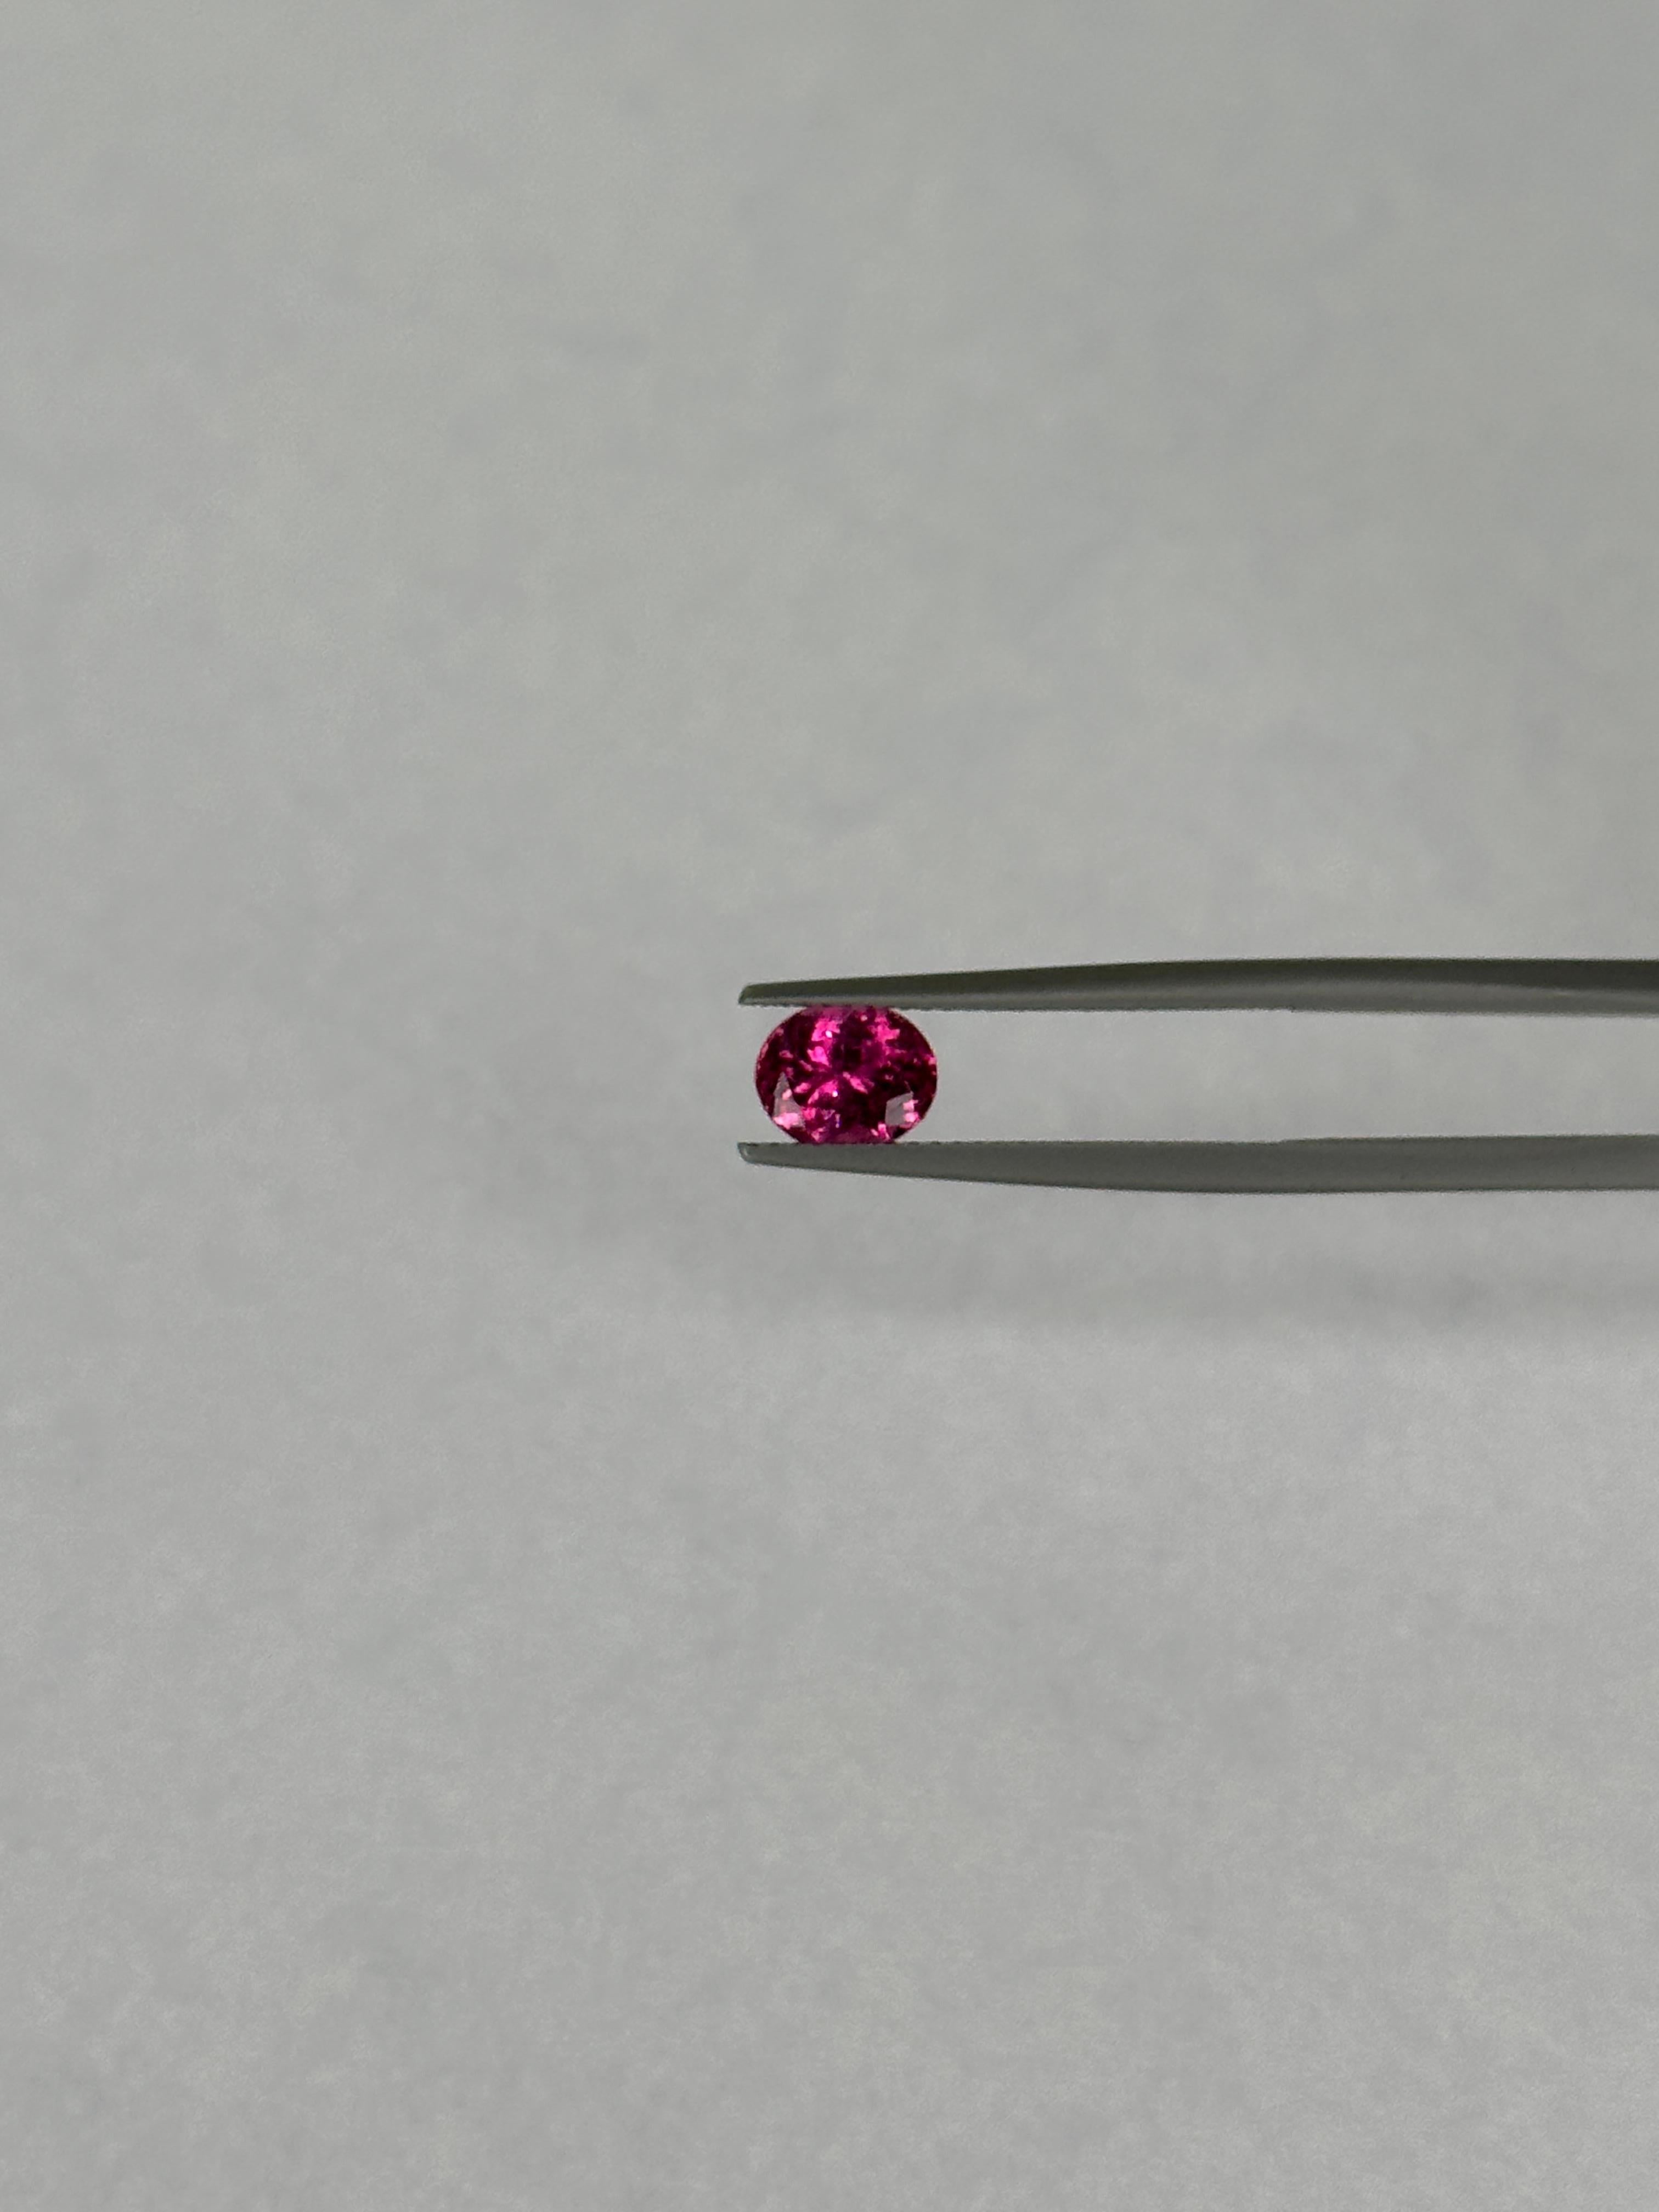 A wonderful Rubellite Tourmaline with an intense pink color from the famous Umba River located in the great African nation, Tanzania.

ID #: TRMC282
Weight: 0.98 Carats
Shape: Oval
Crown: Modified Brilliant
Pavilion: Modified Brilliant
Gem